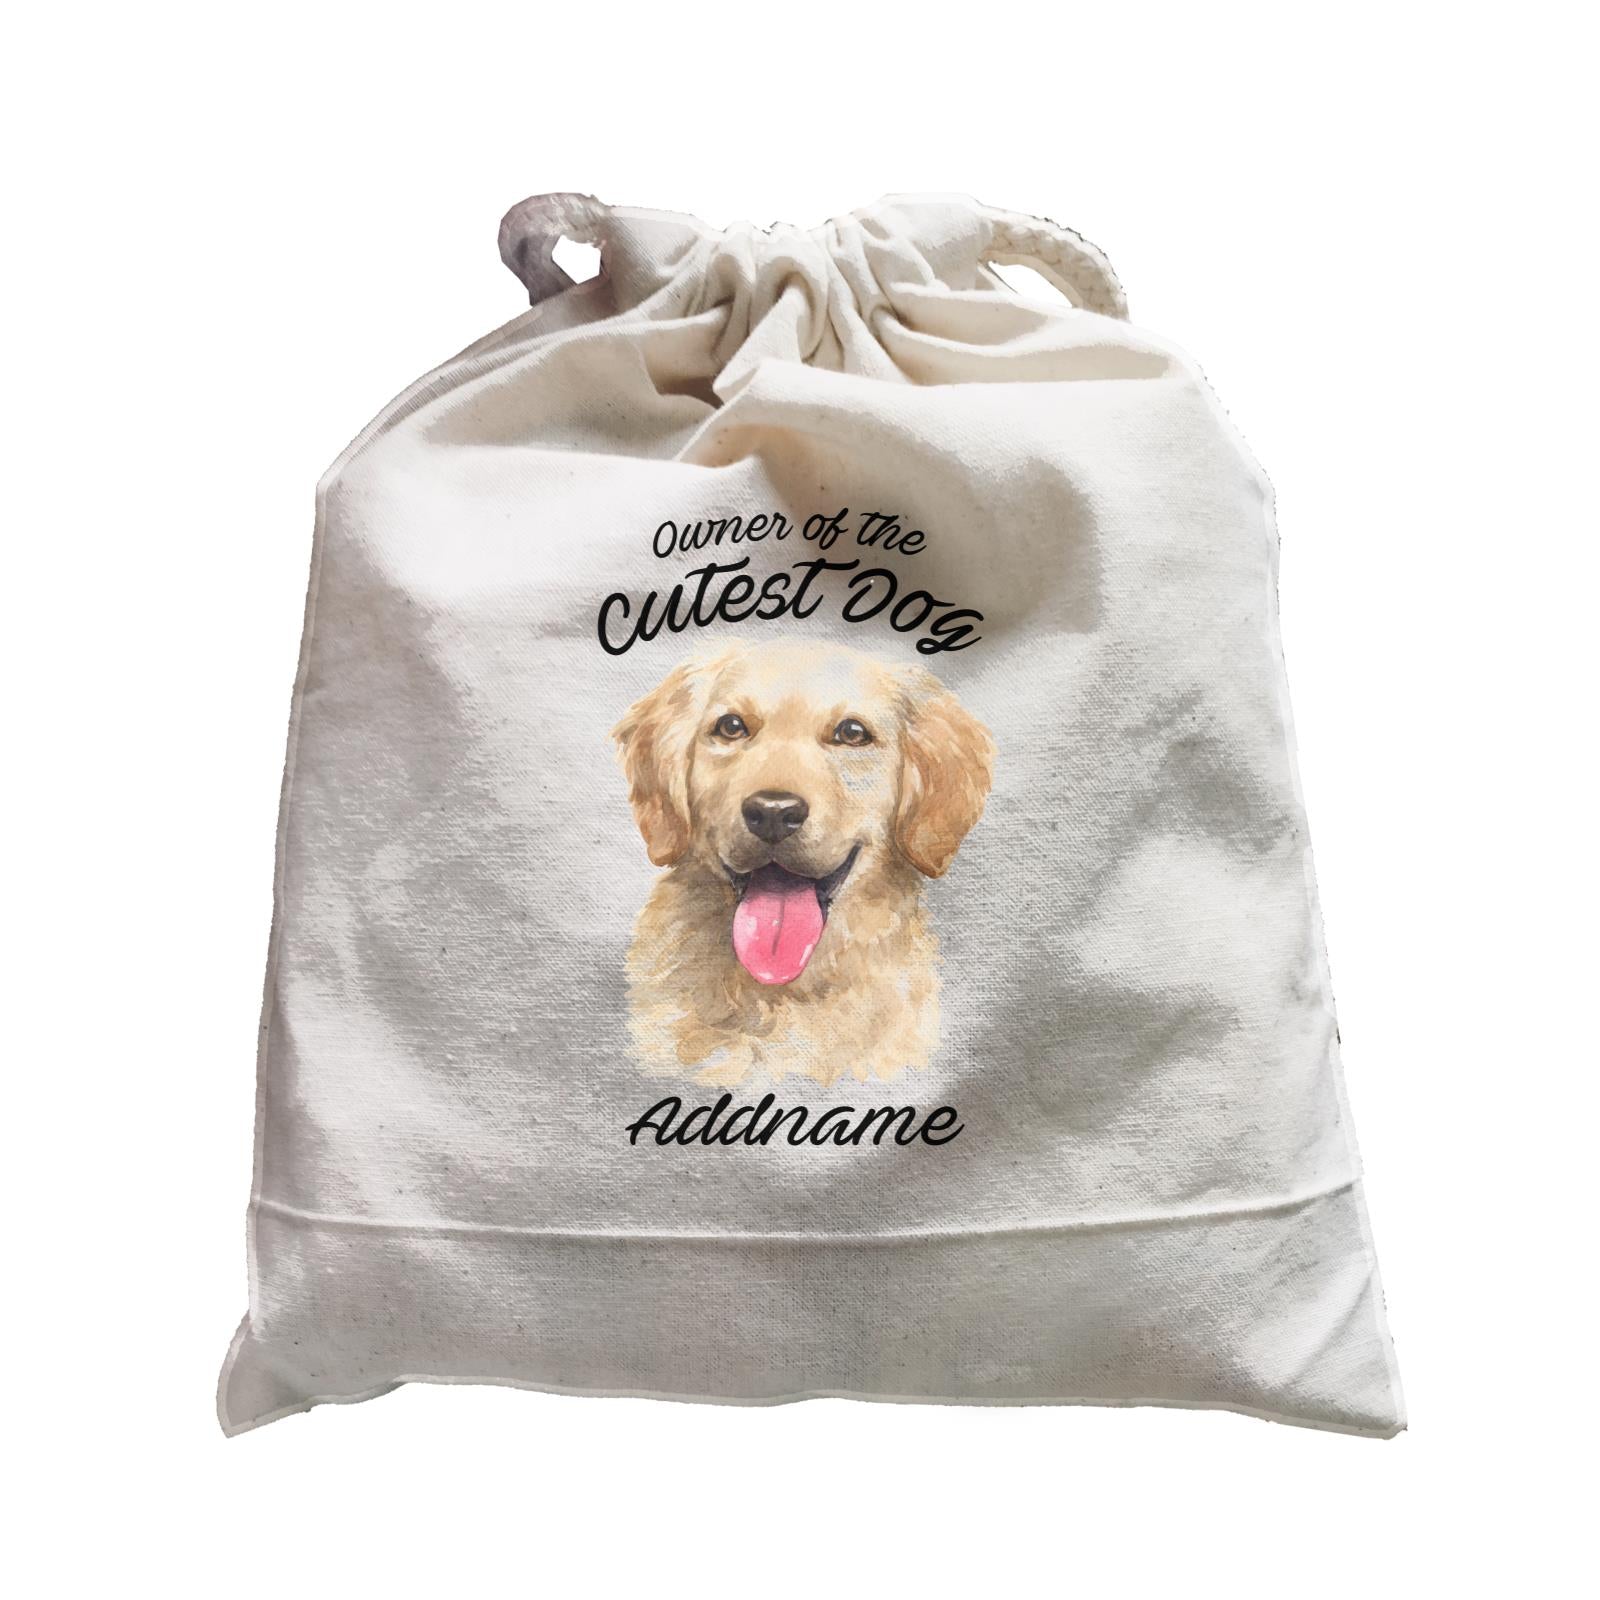 Watercolor Dog Owner Of The Cutest Dog Golden Retriever Front Addname Satchel